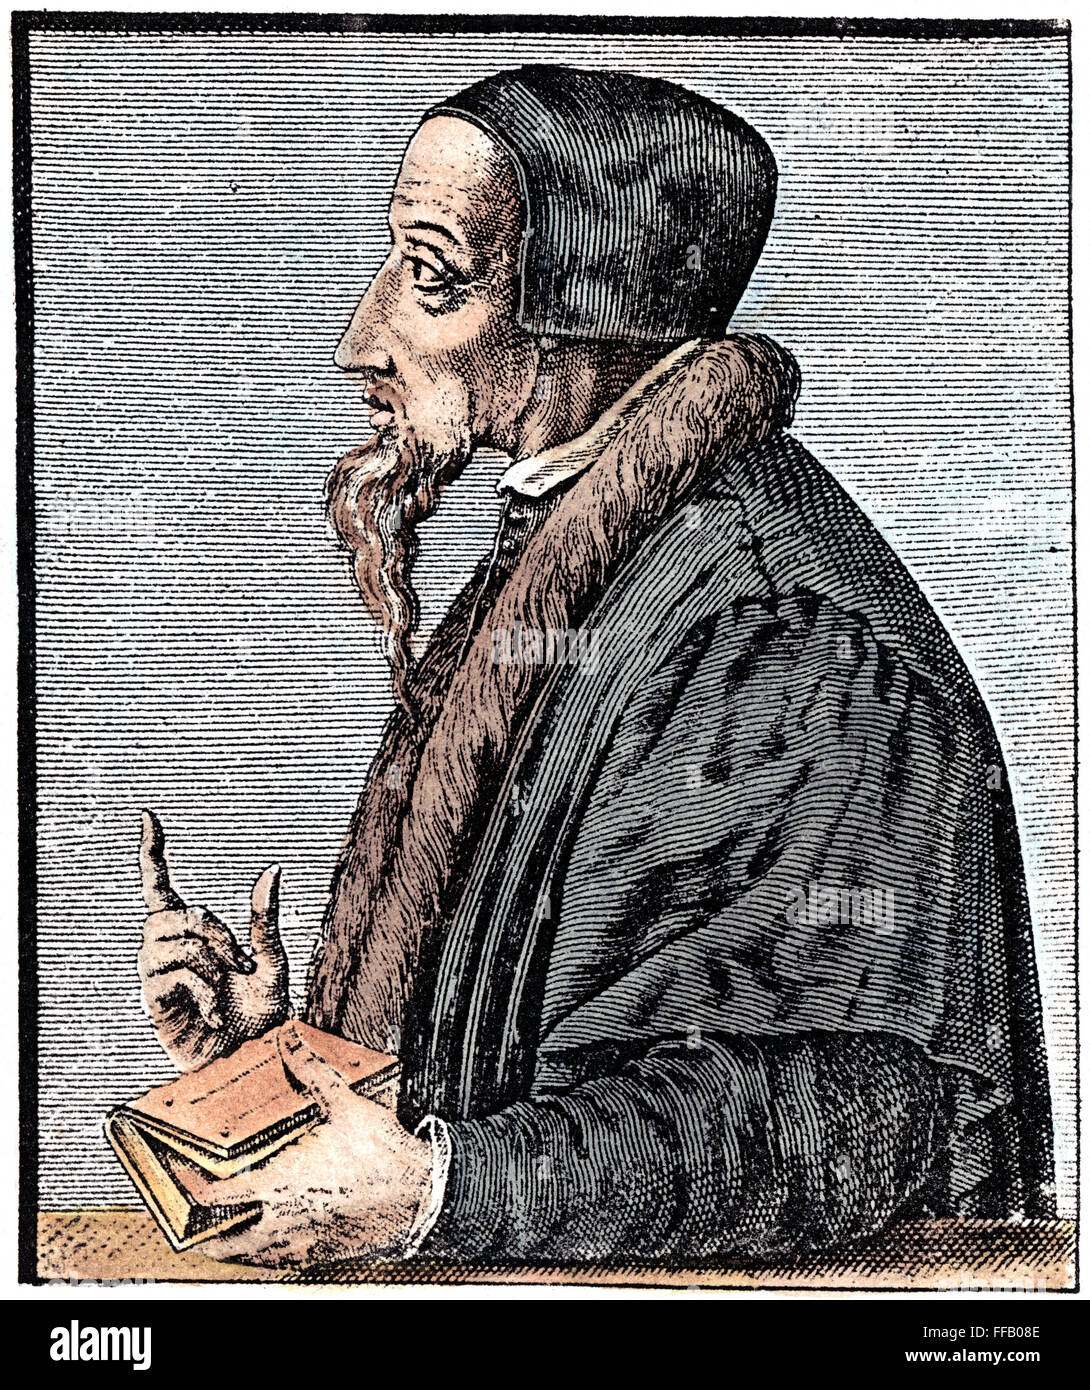 JOHN CALVIN (1509-1564). /nFrench theologian and reformer. Line engraving, 16th century. Stock Photo